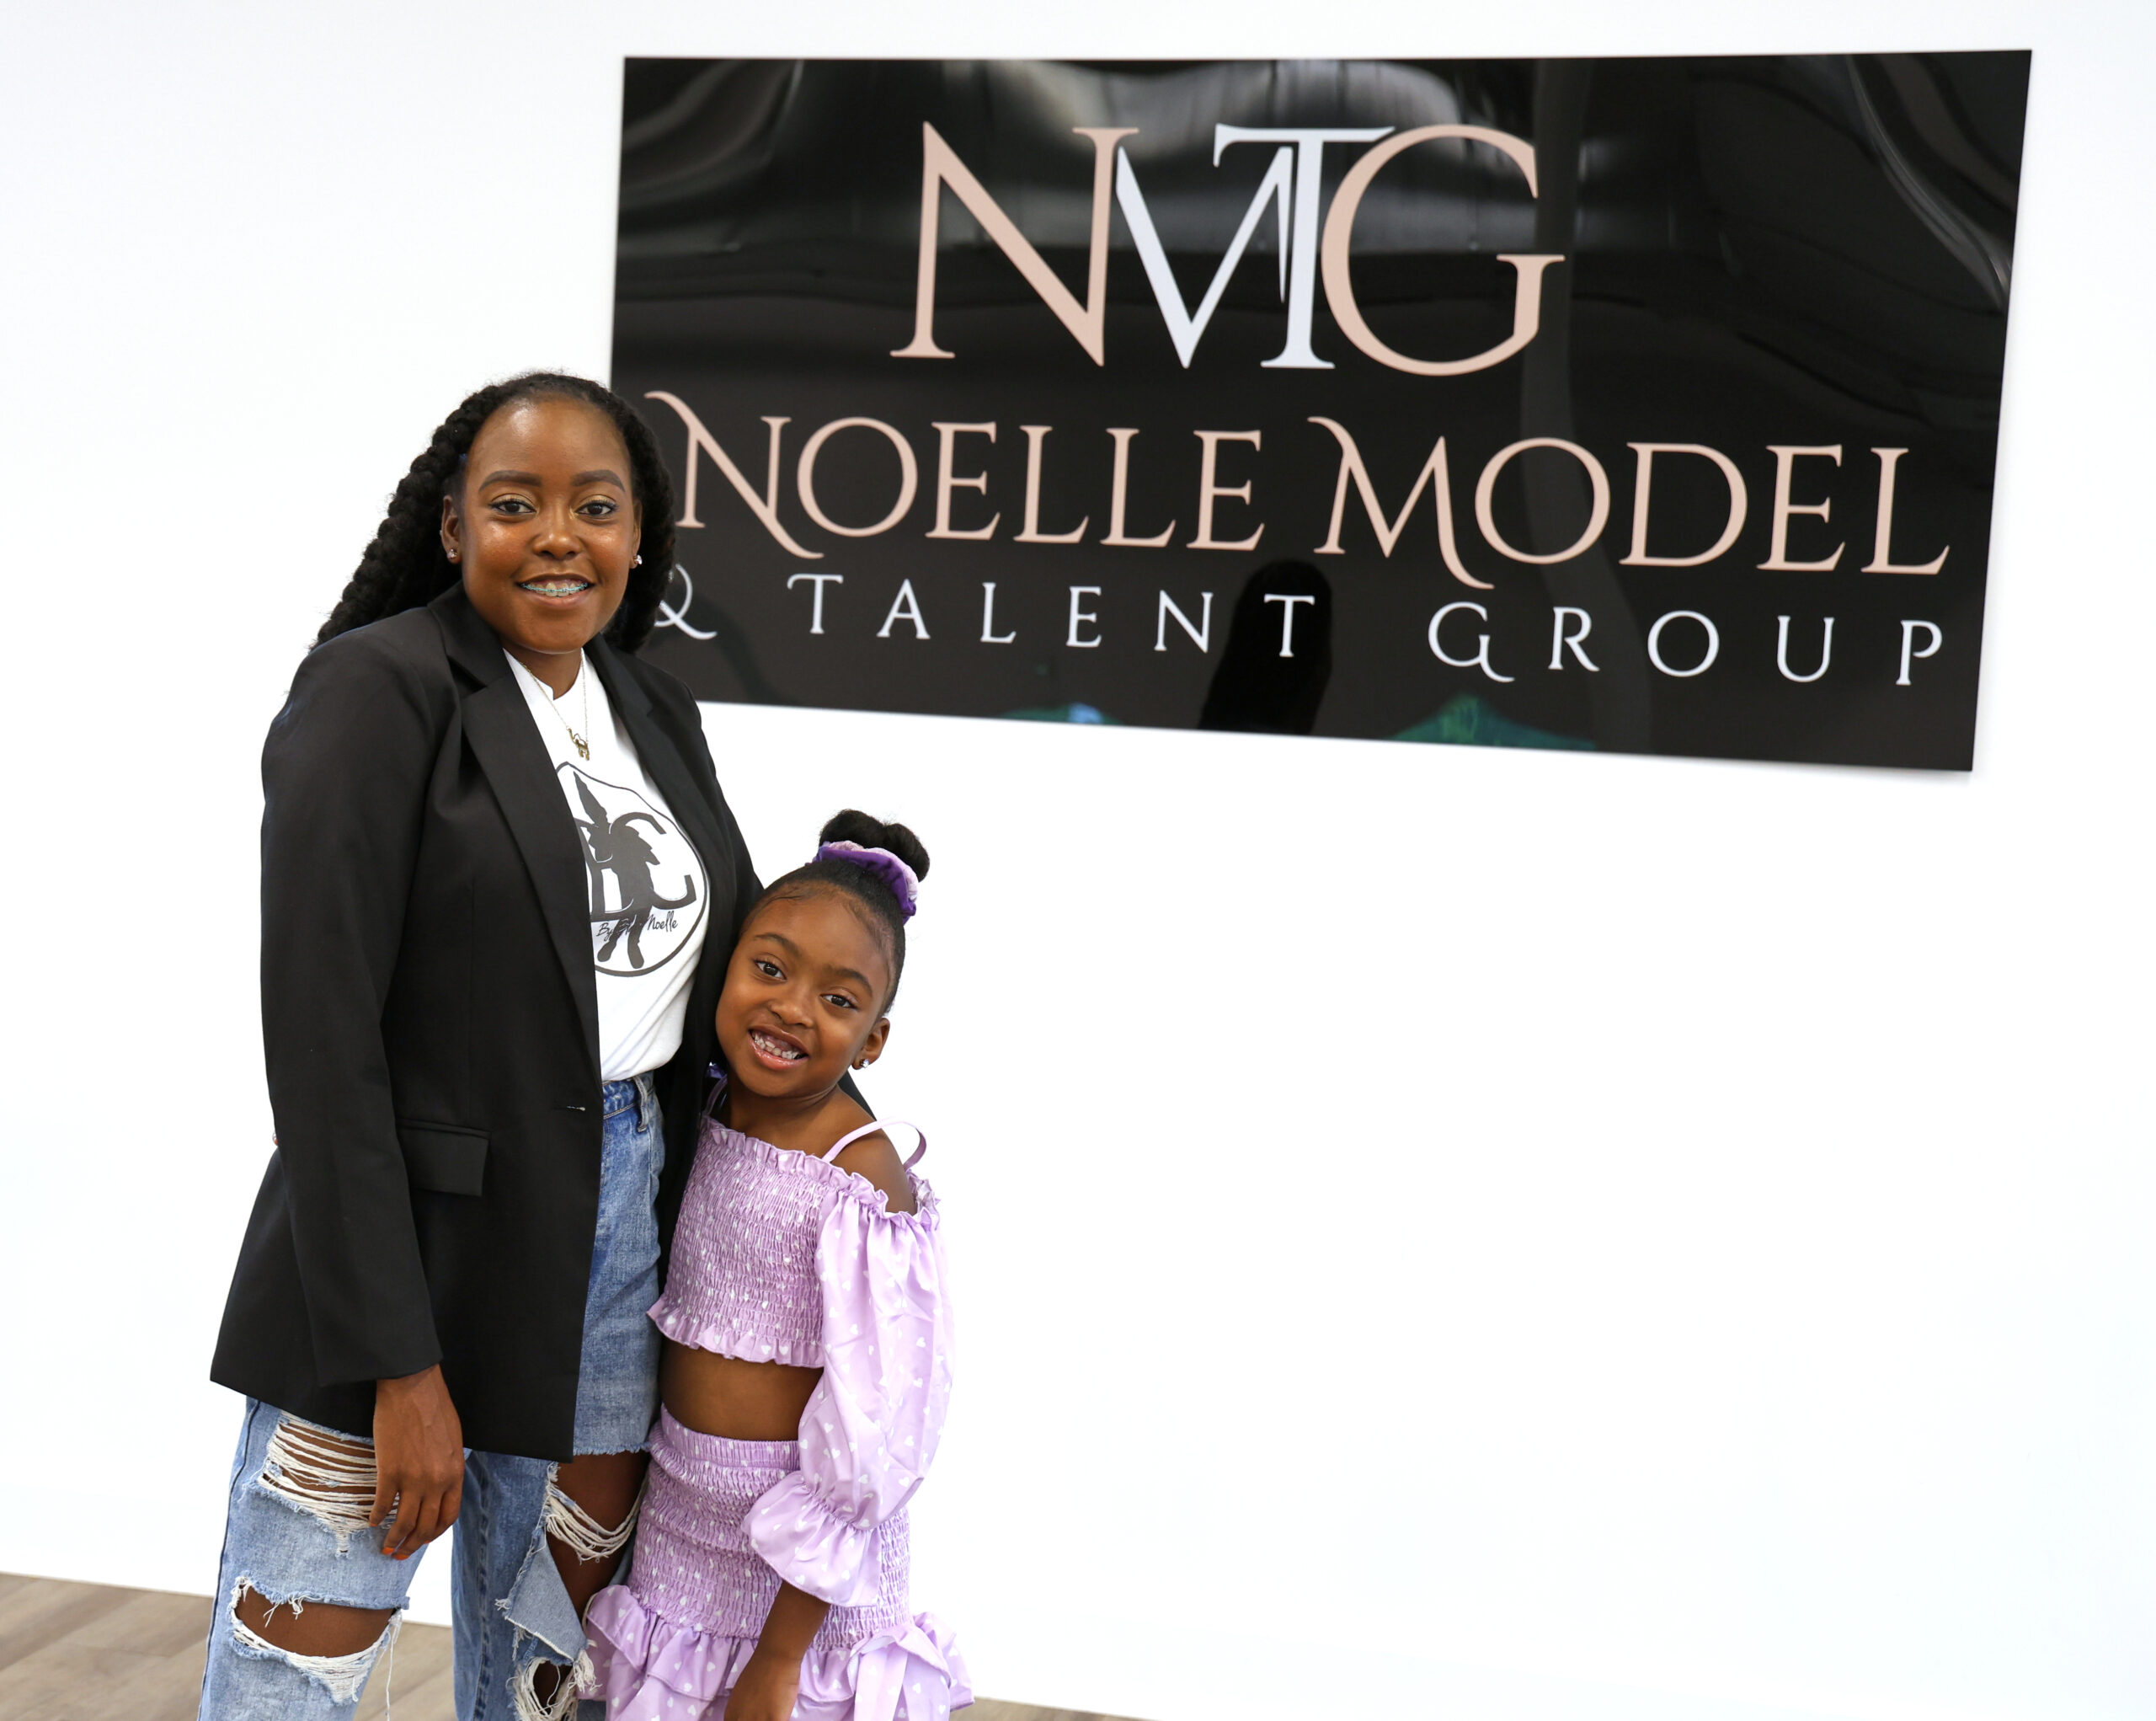 Dr. Cryshaunda Rorie and her daughter, Blair stand in front of a Noelle Model Talent Group sign in High Point, NC.